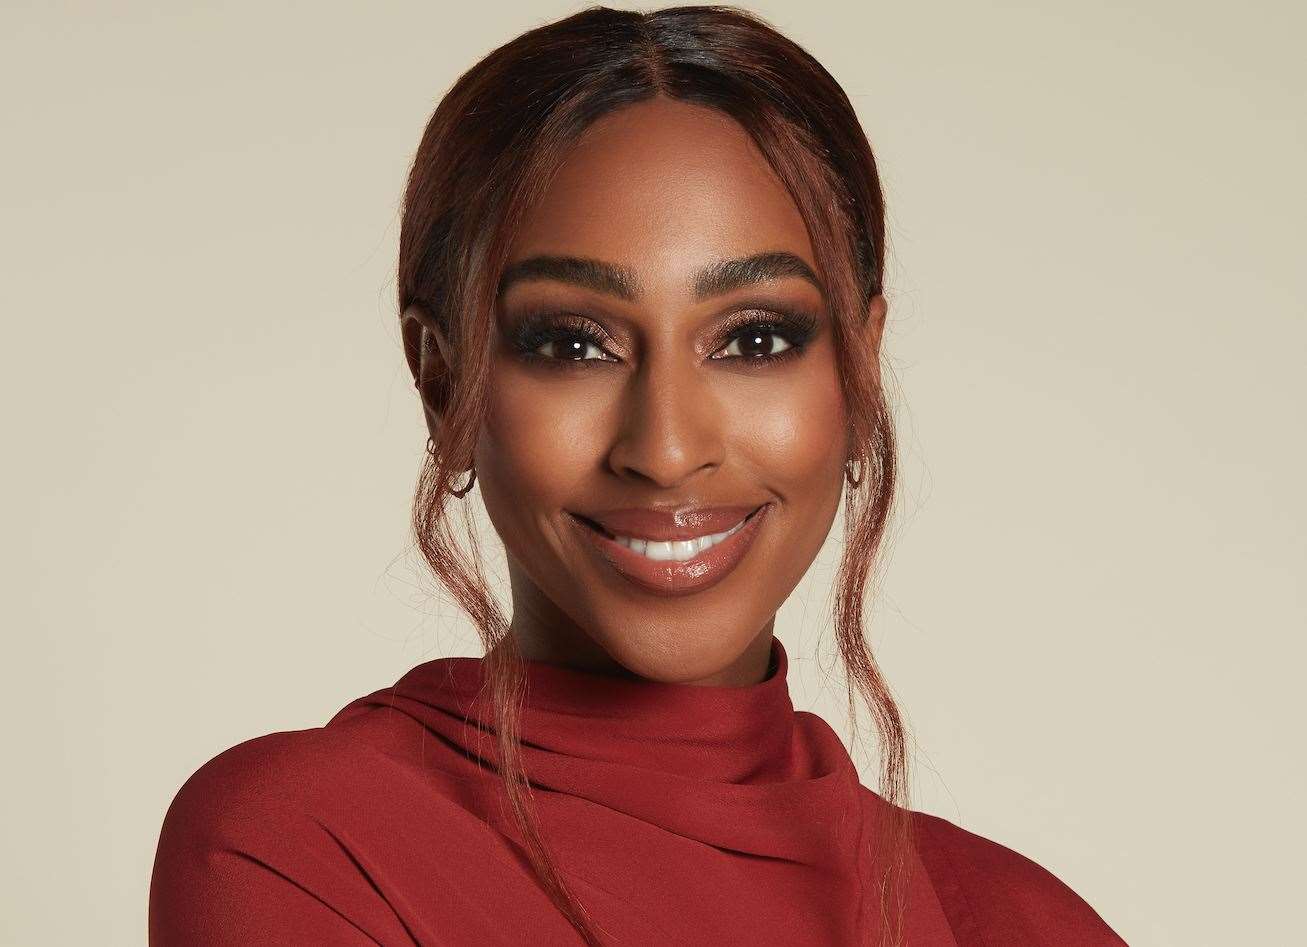 Alexandra Burke was due to perform but has had to pull out